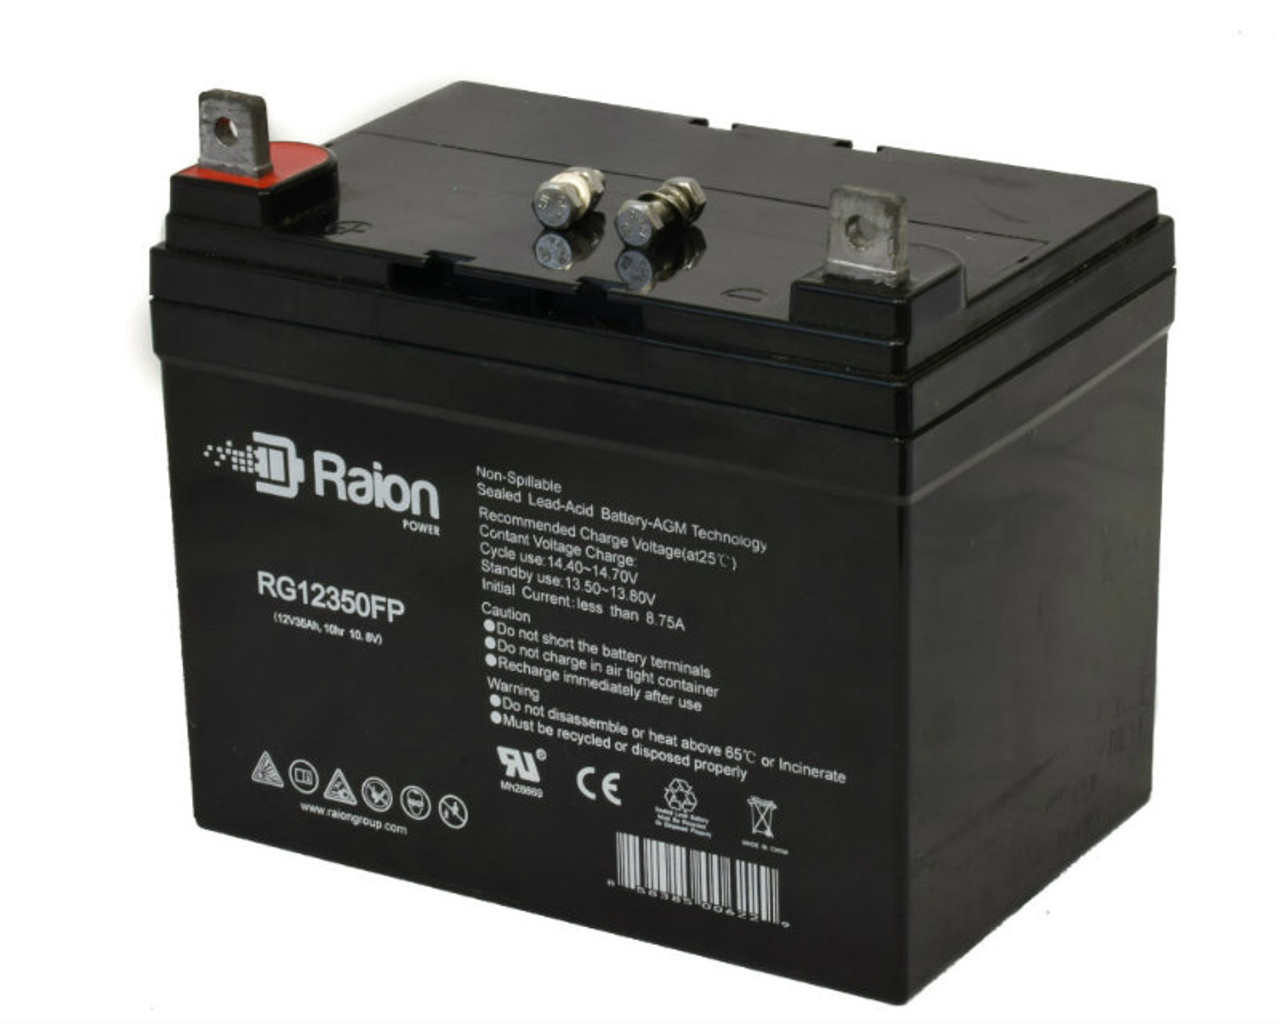 Raion Power Replacement 12V 35Ah RG12350FP Battery for Toro 314-8